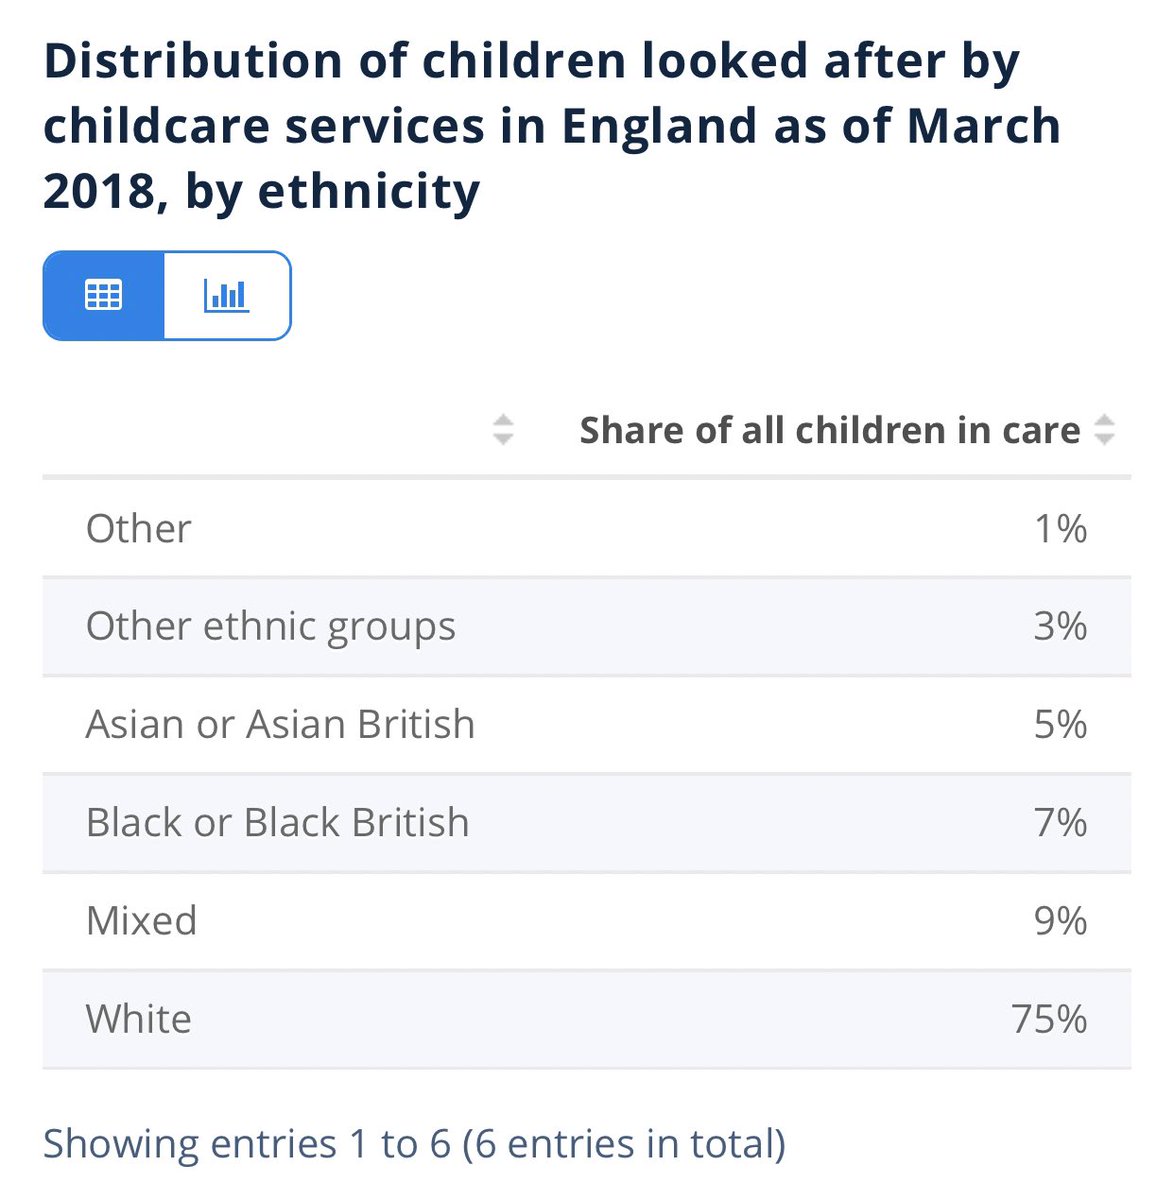 So yes jokes about mixed race Black kids growing up around white family members only aren’t funny to me. There’s a reason mixed race kids are the biggest non-white group in social care, 4 times overrepresented.